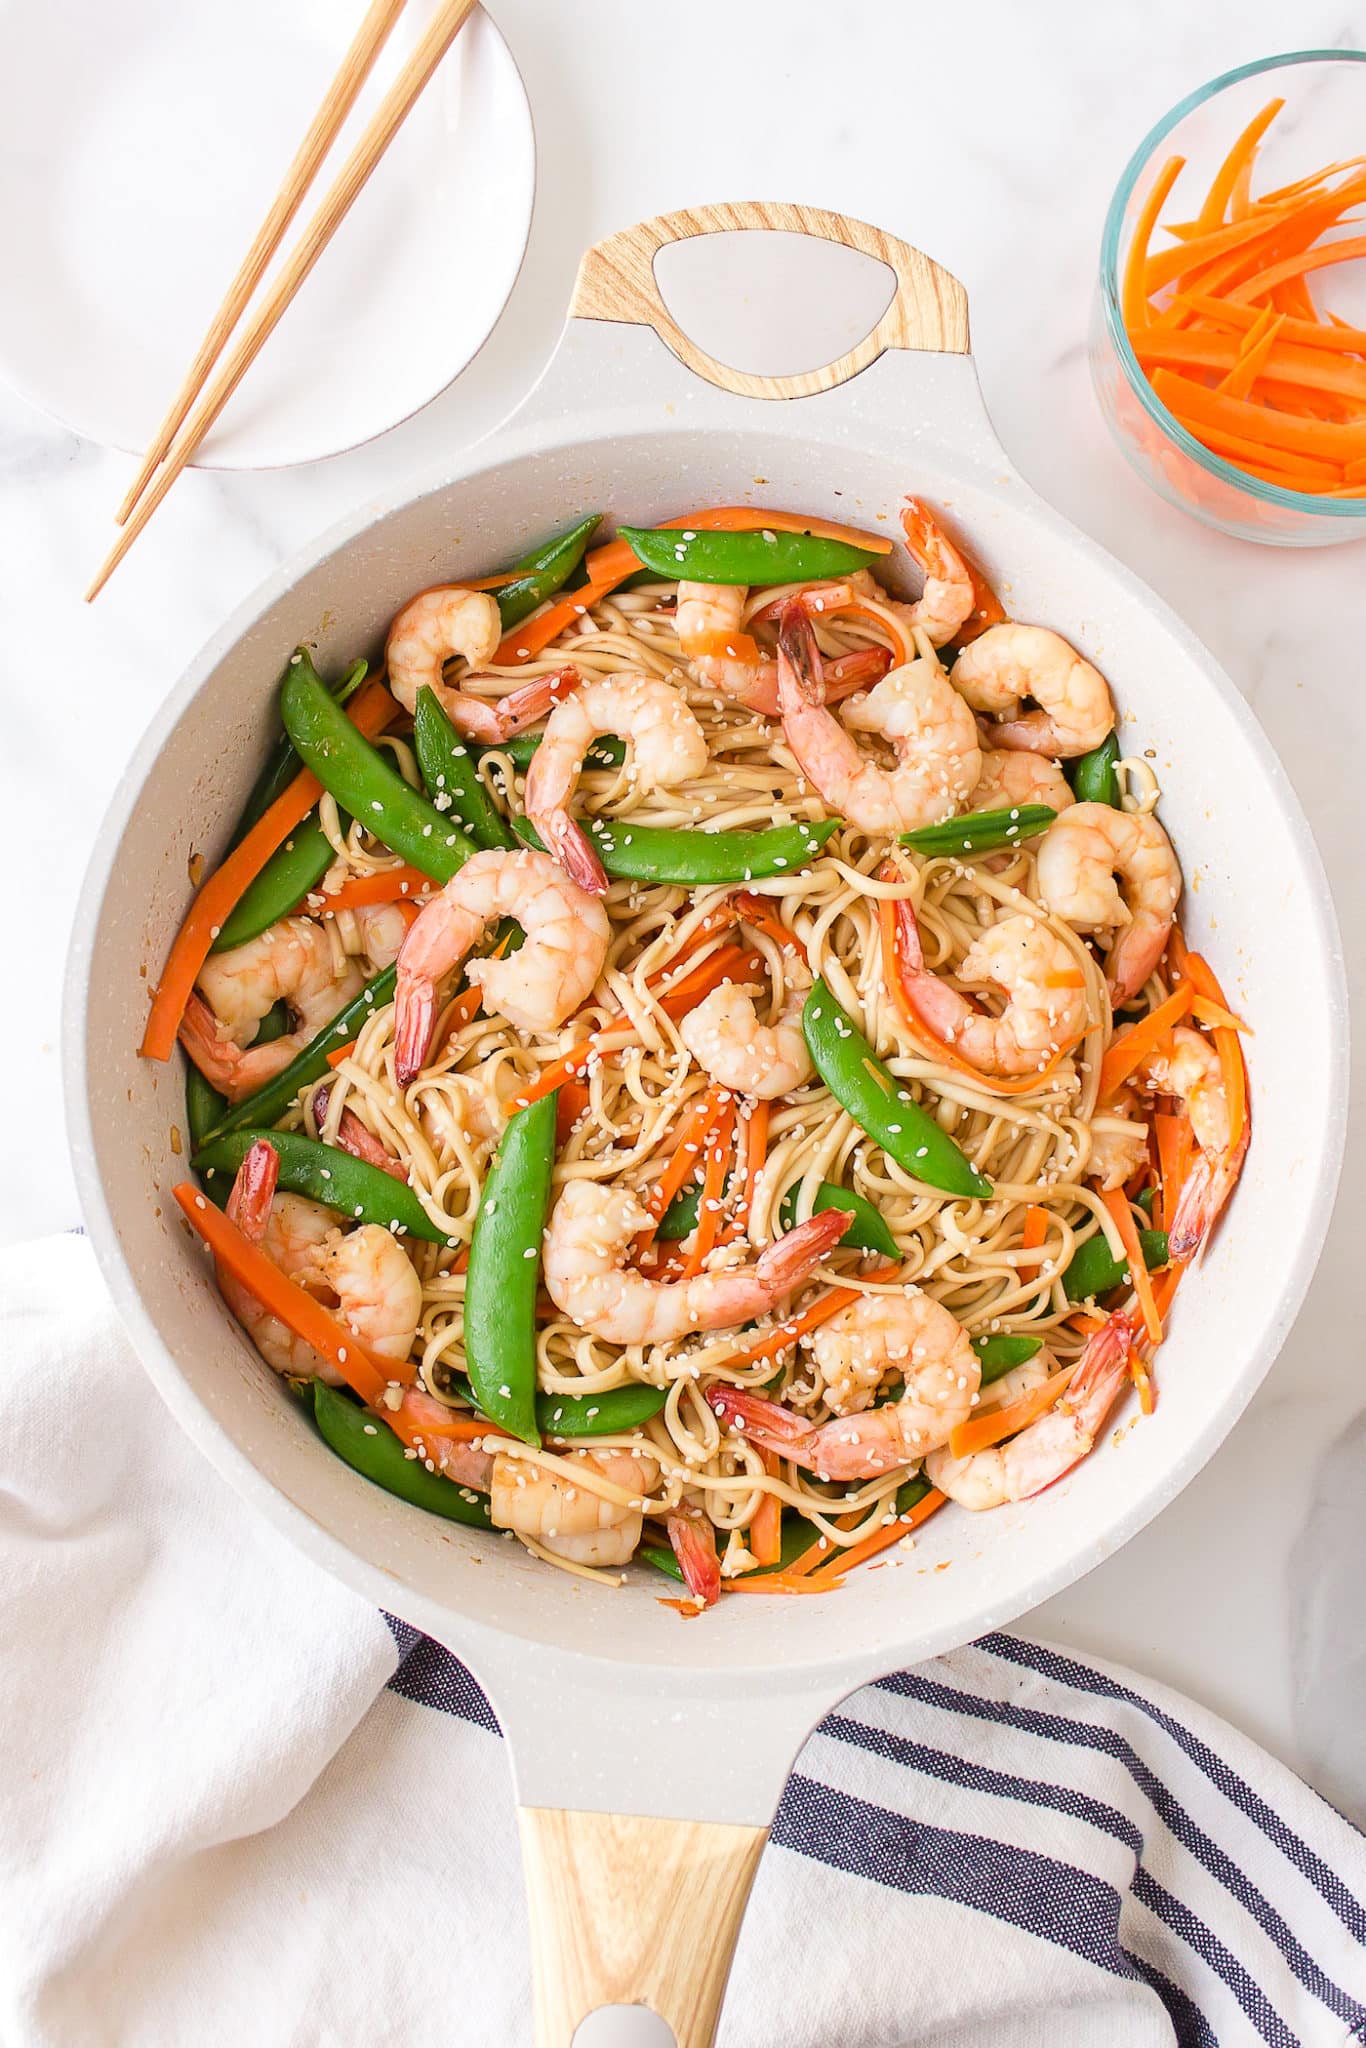 shrimp udon with veggies served in a white dish with chopsticks.